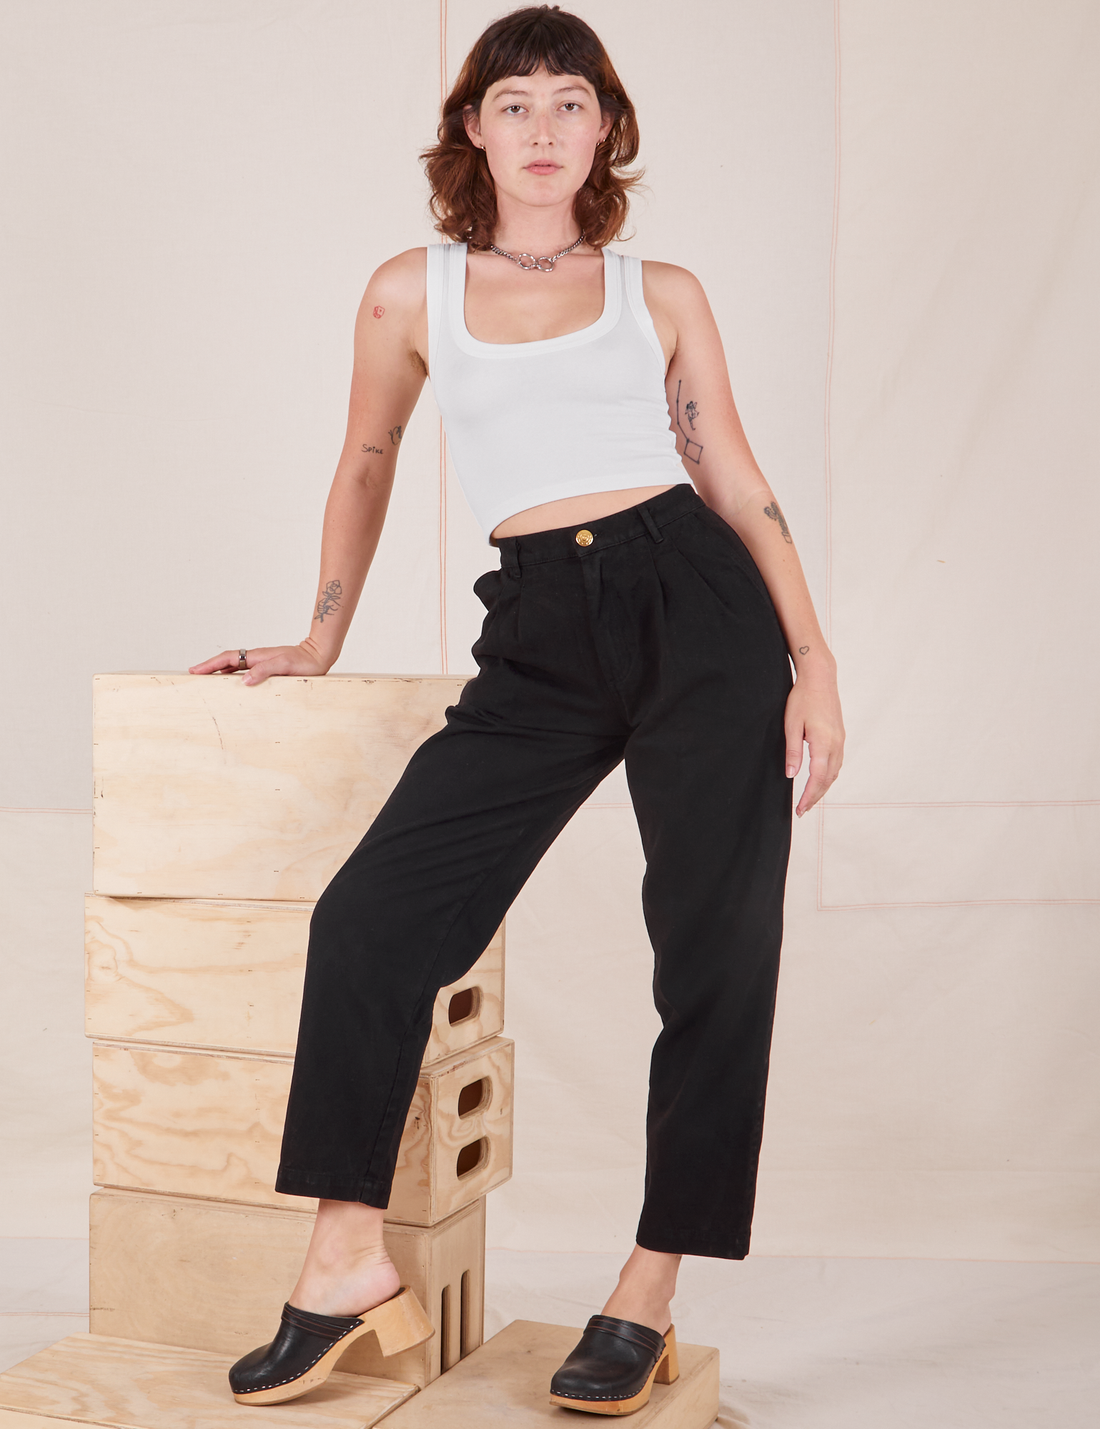 Alex is wearing Heavyweight Trousers in Basic Black and vintage off-white Cropped Tank Top.